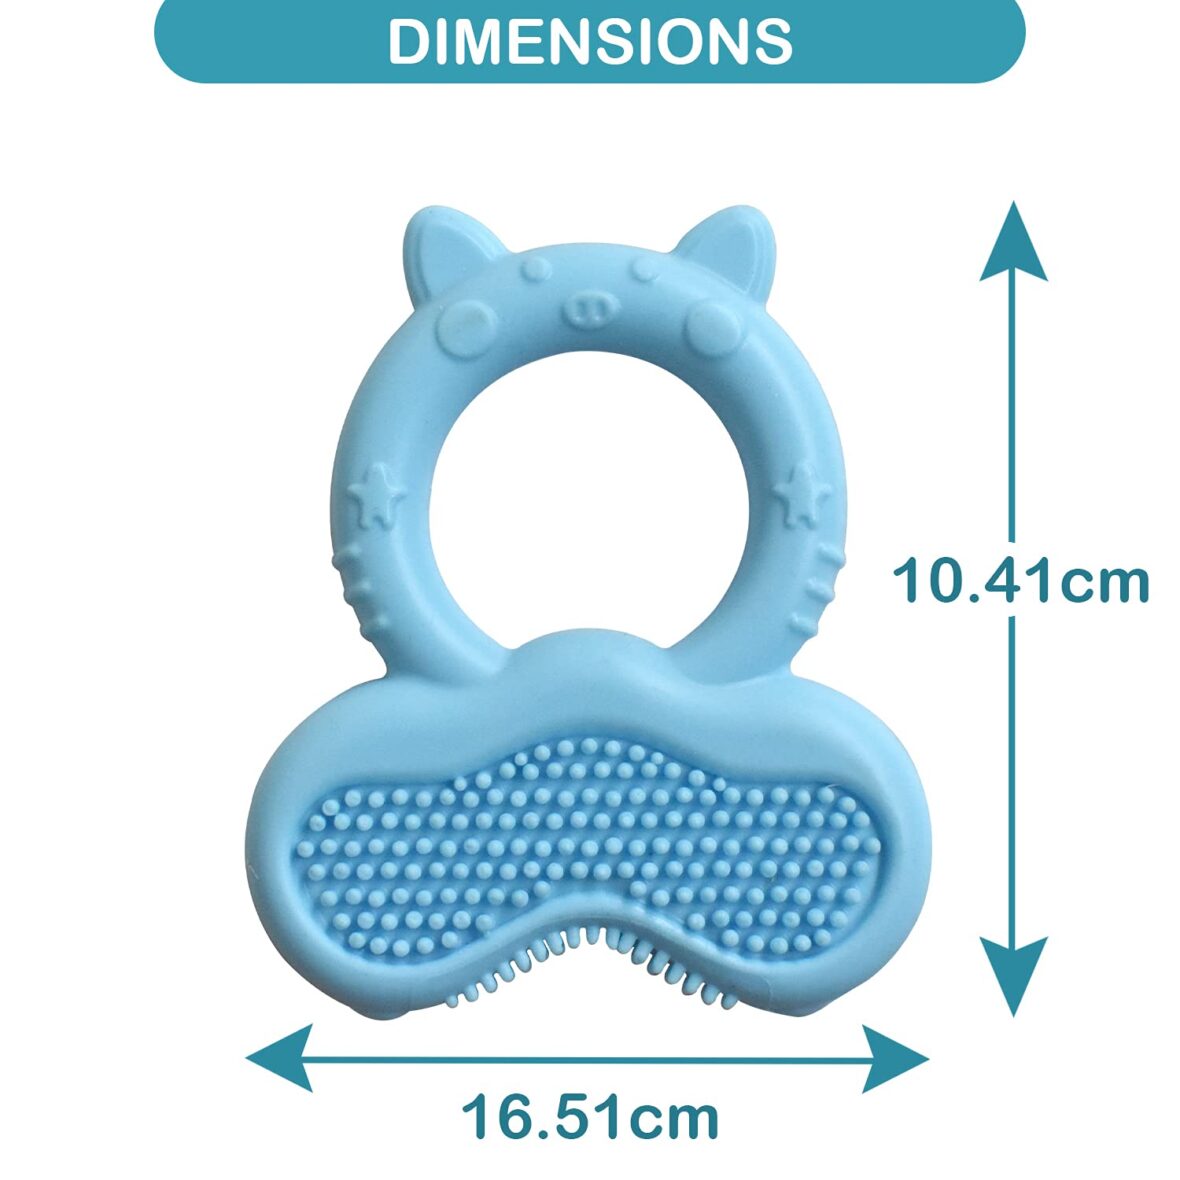 LuvLap Silicone Baby Teether with Bristles, Teething Toy for Infants and Babies, 100% Food Grade Silicone, Blue